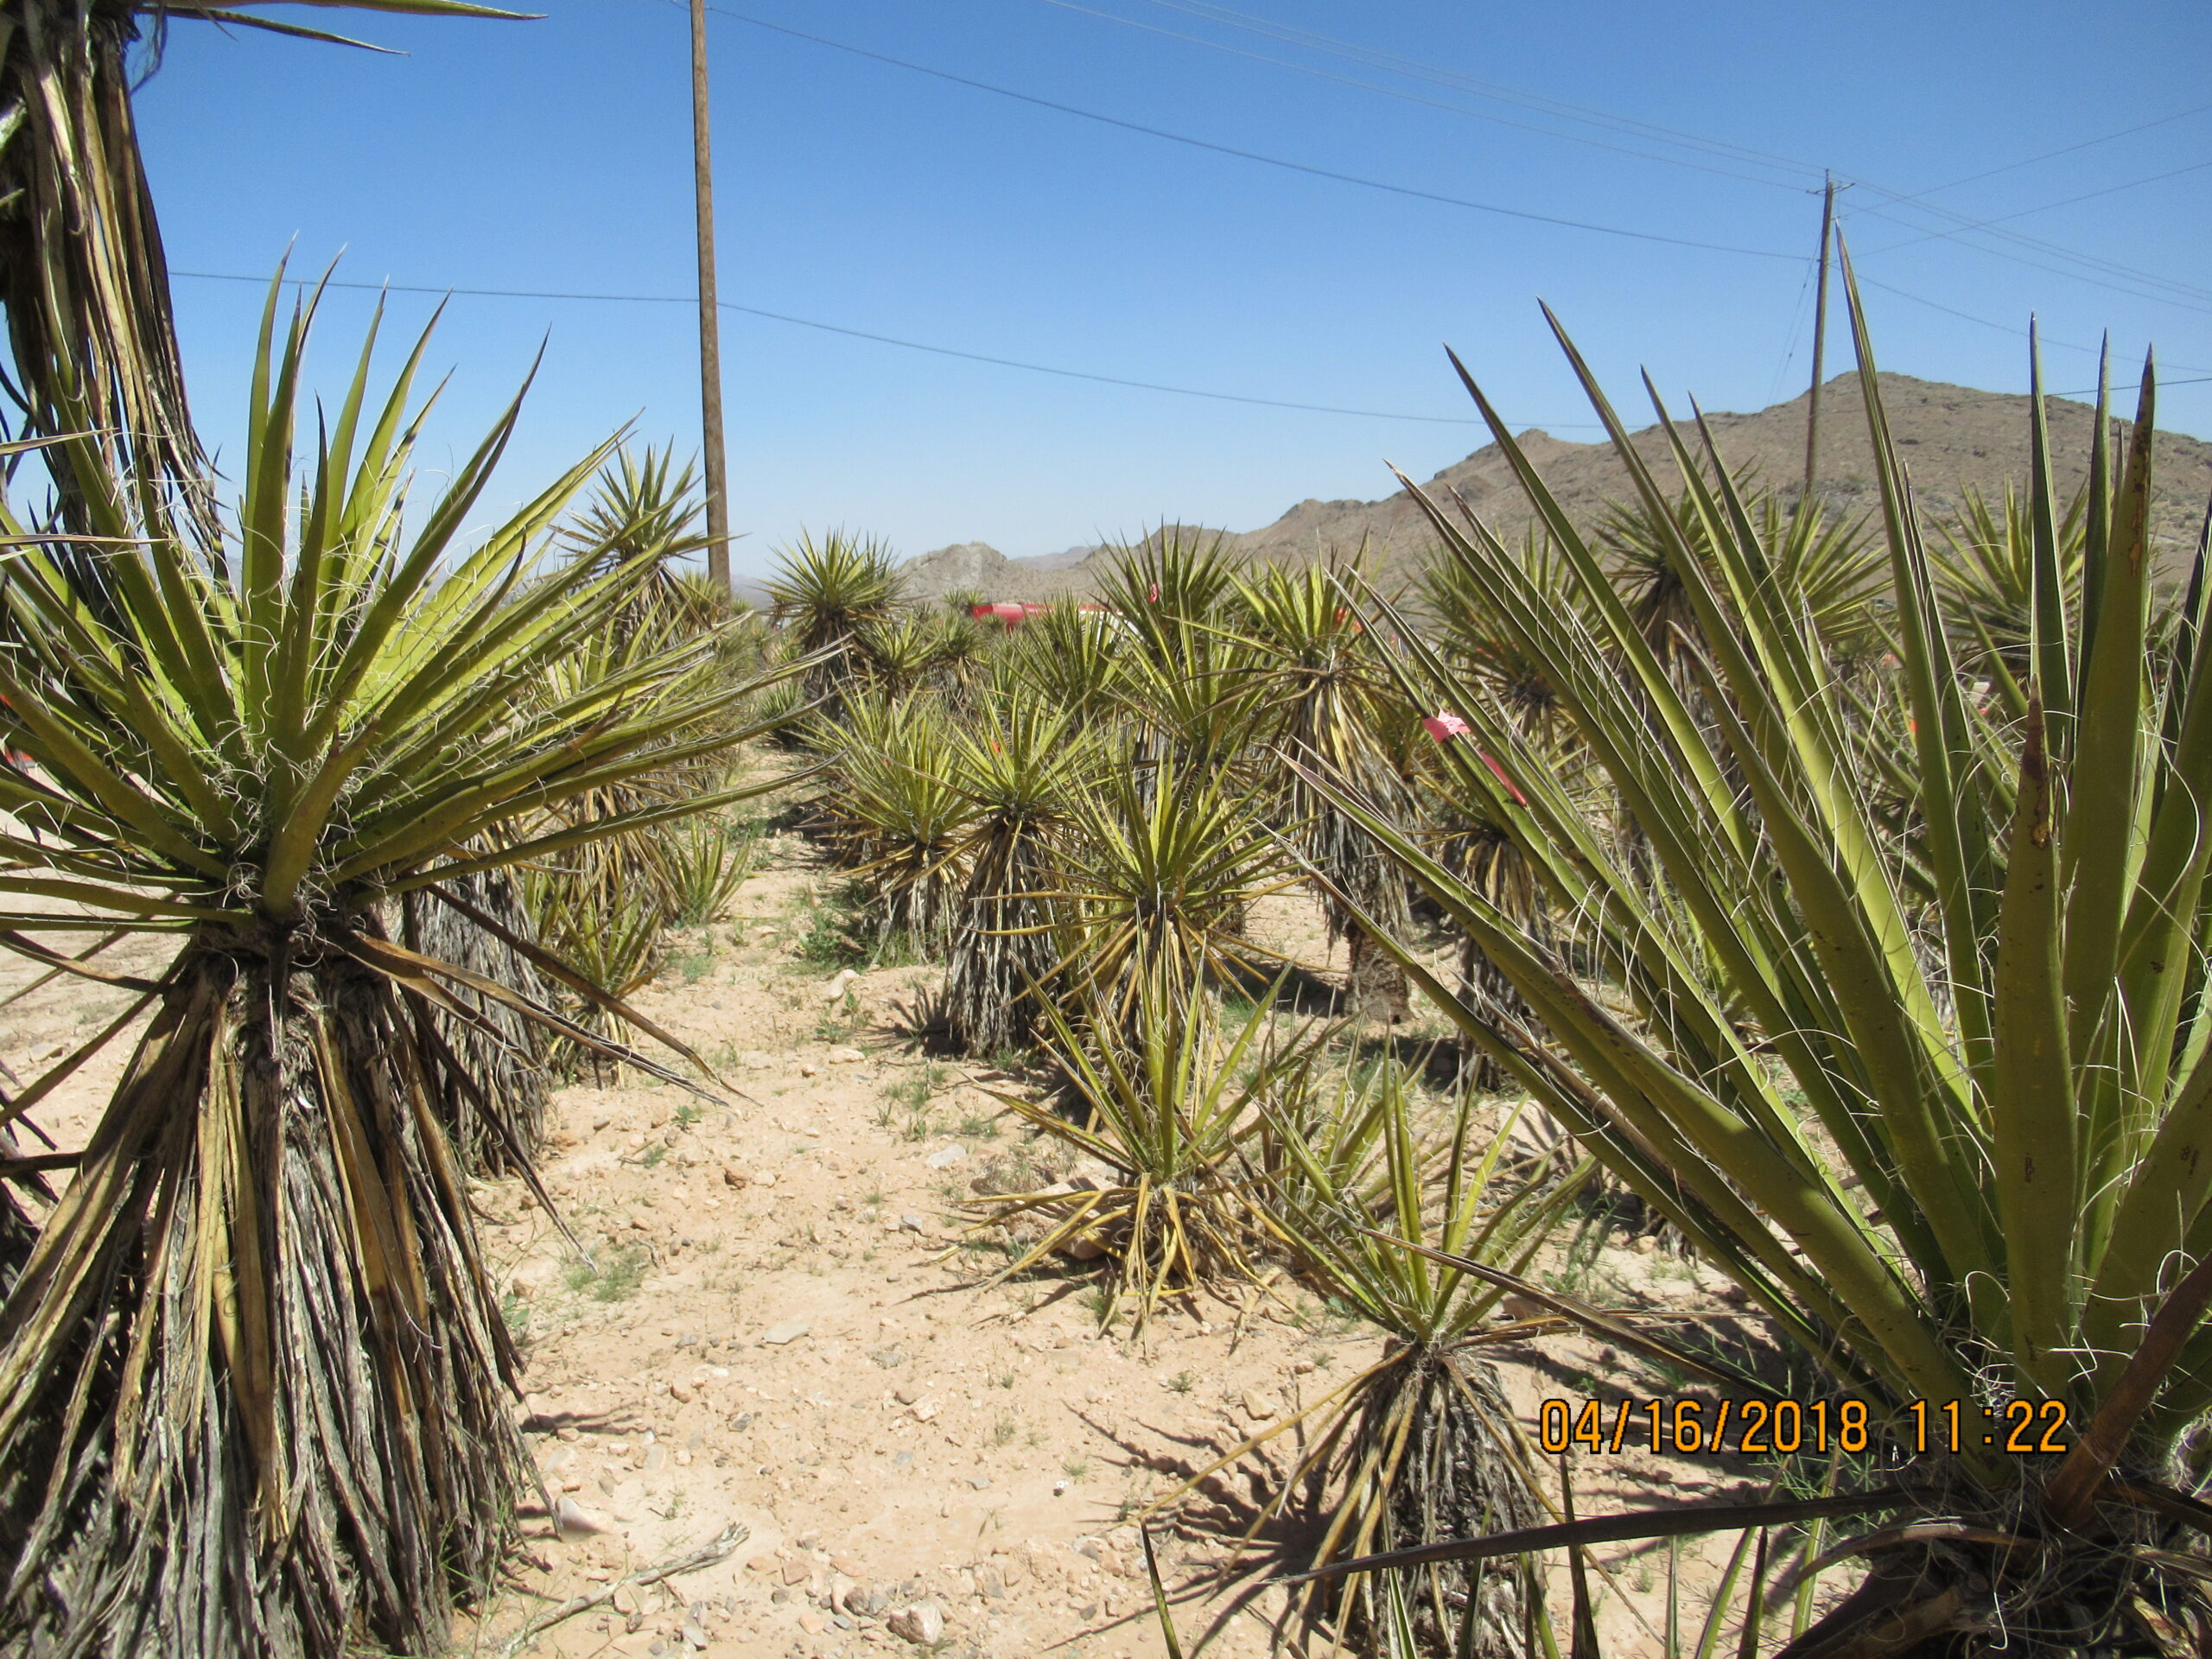 Lines of Yucca plants